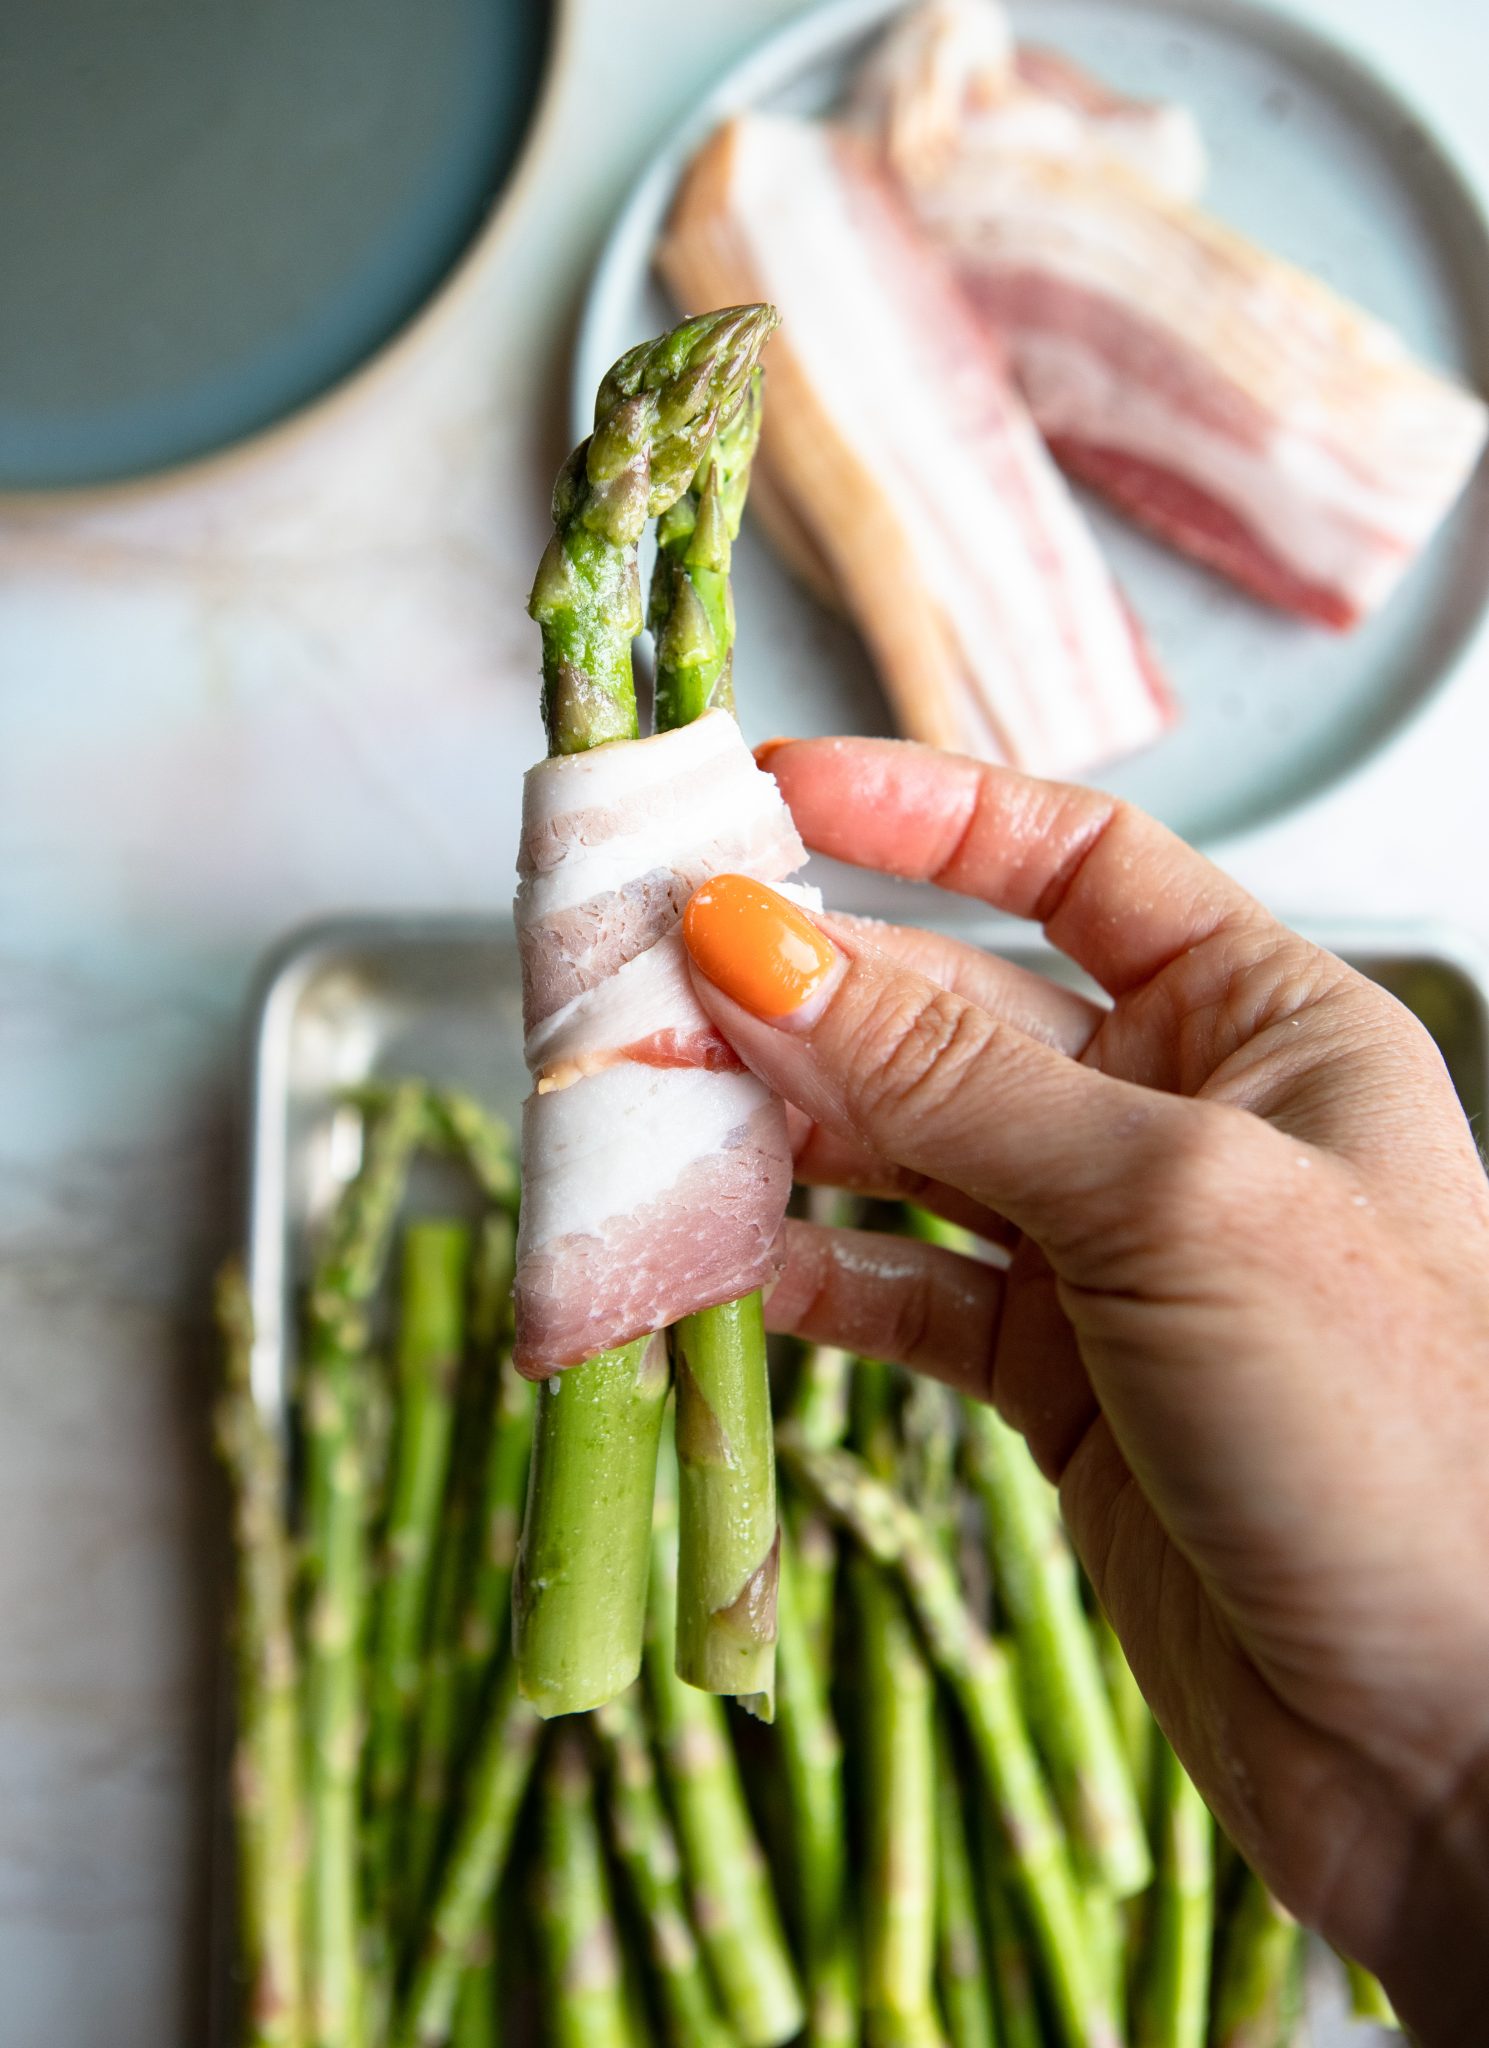 raw bacon wrapped around uncooked asparagus